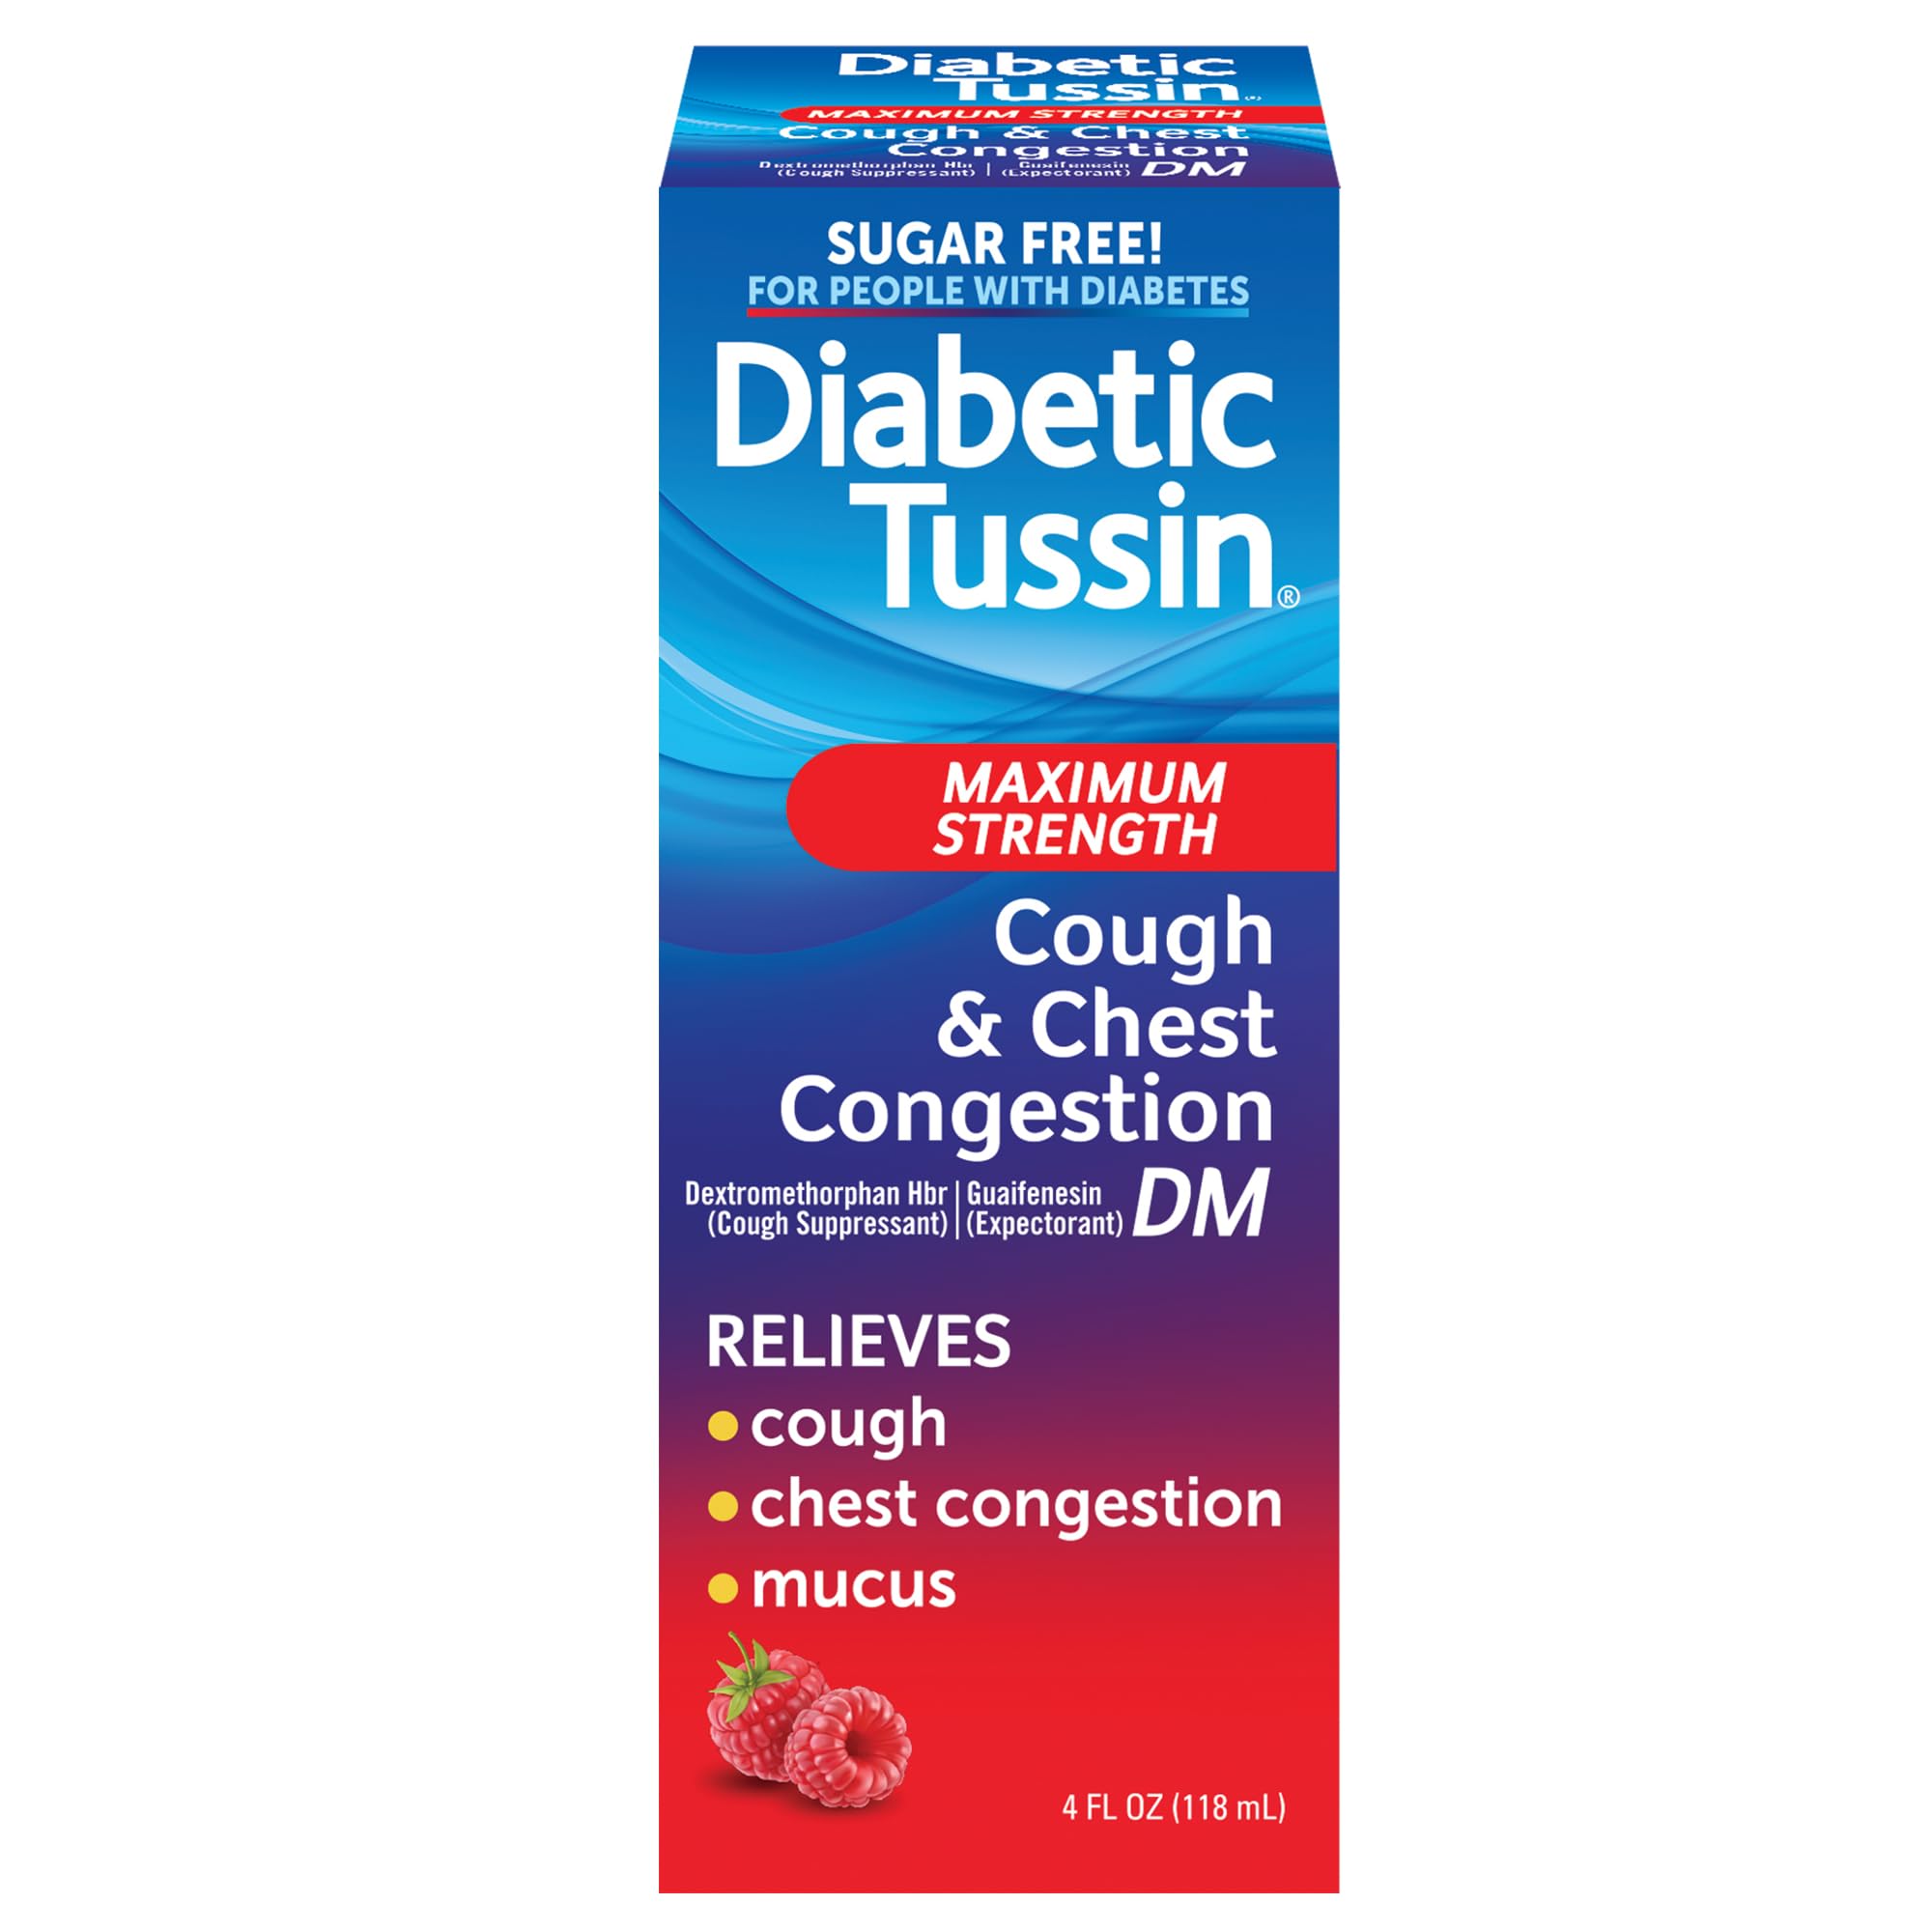 4-Oz Diabetic Tussin DM Maximum Strength Cough and Chest Congestion Relief Liquid Cough Syrup (Berry) $4.70 w/ S&S + Free Shipping w/ Prime or on $35+